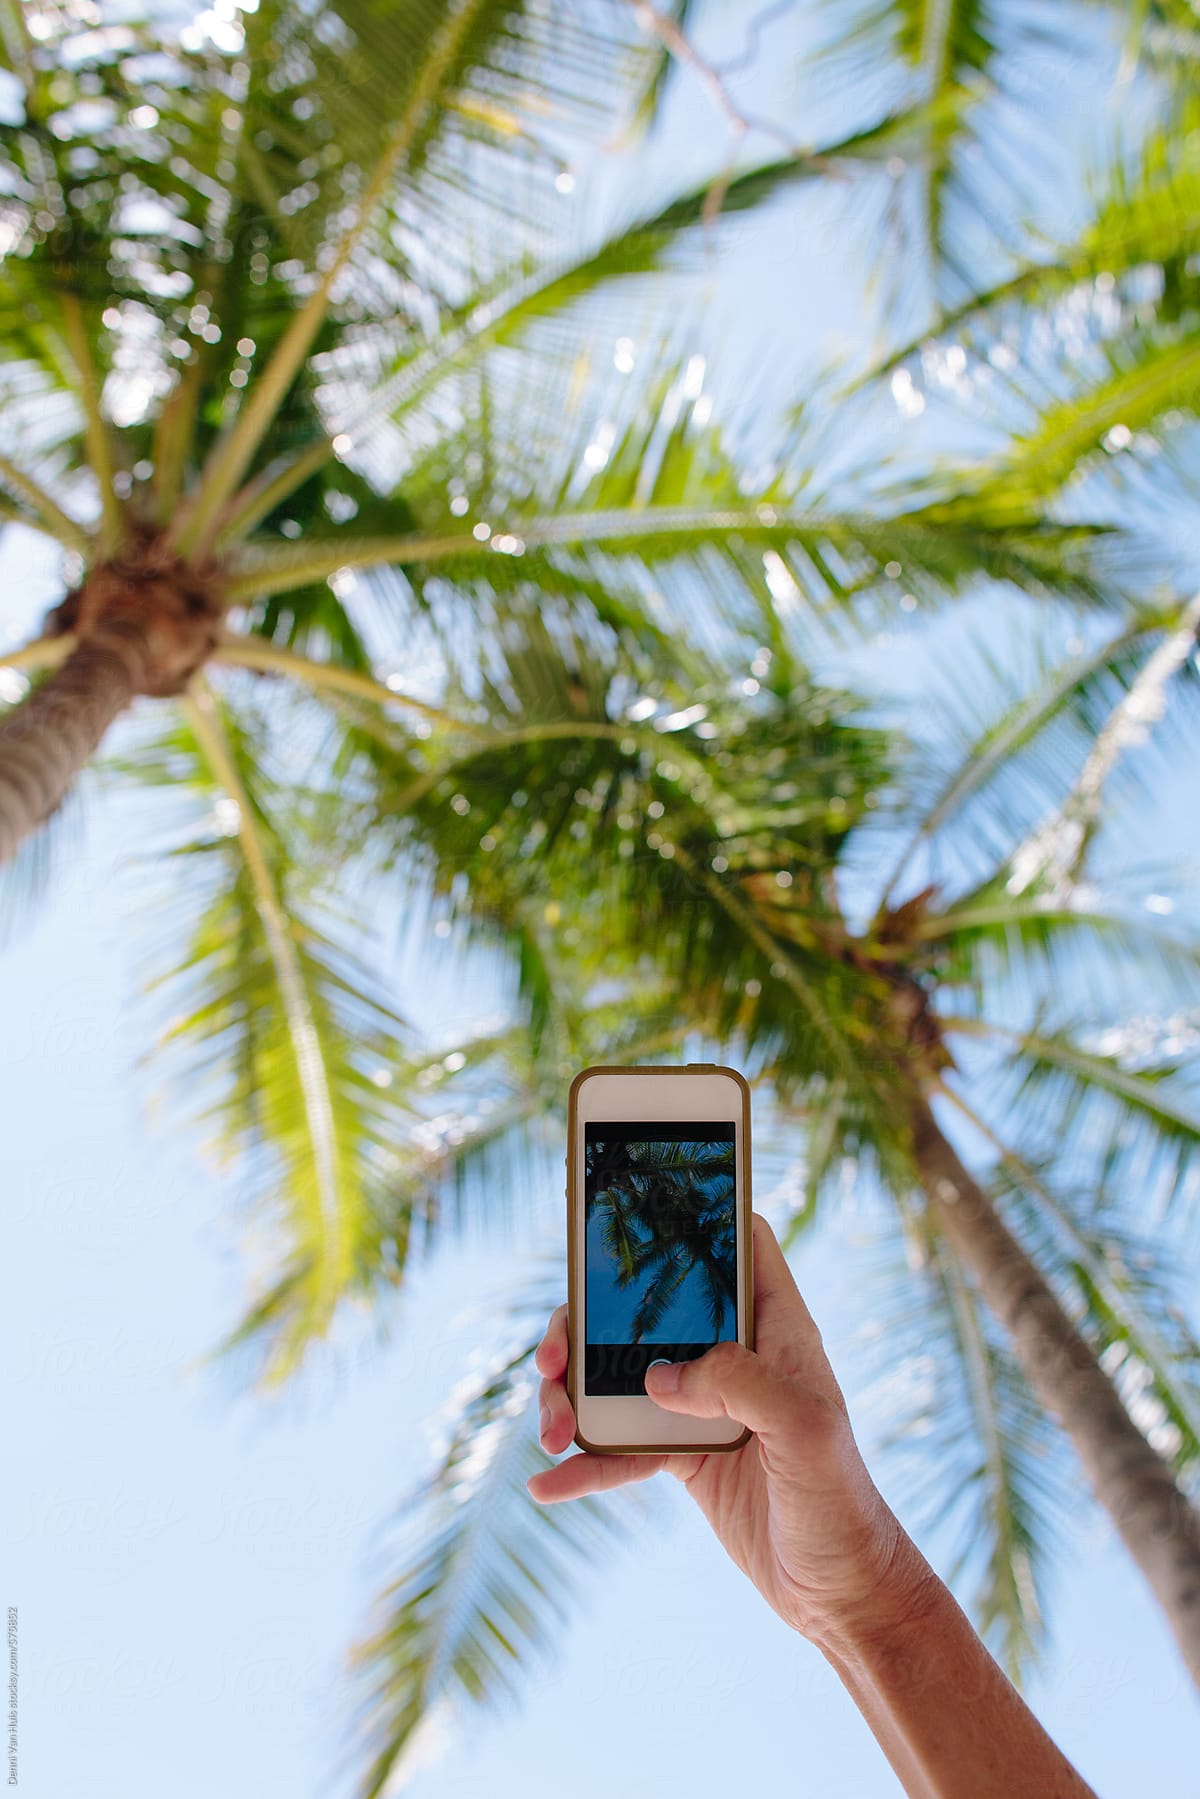 Woman taking a photo under the palm trees with her phone.